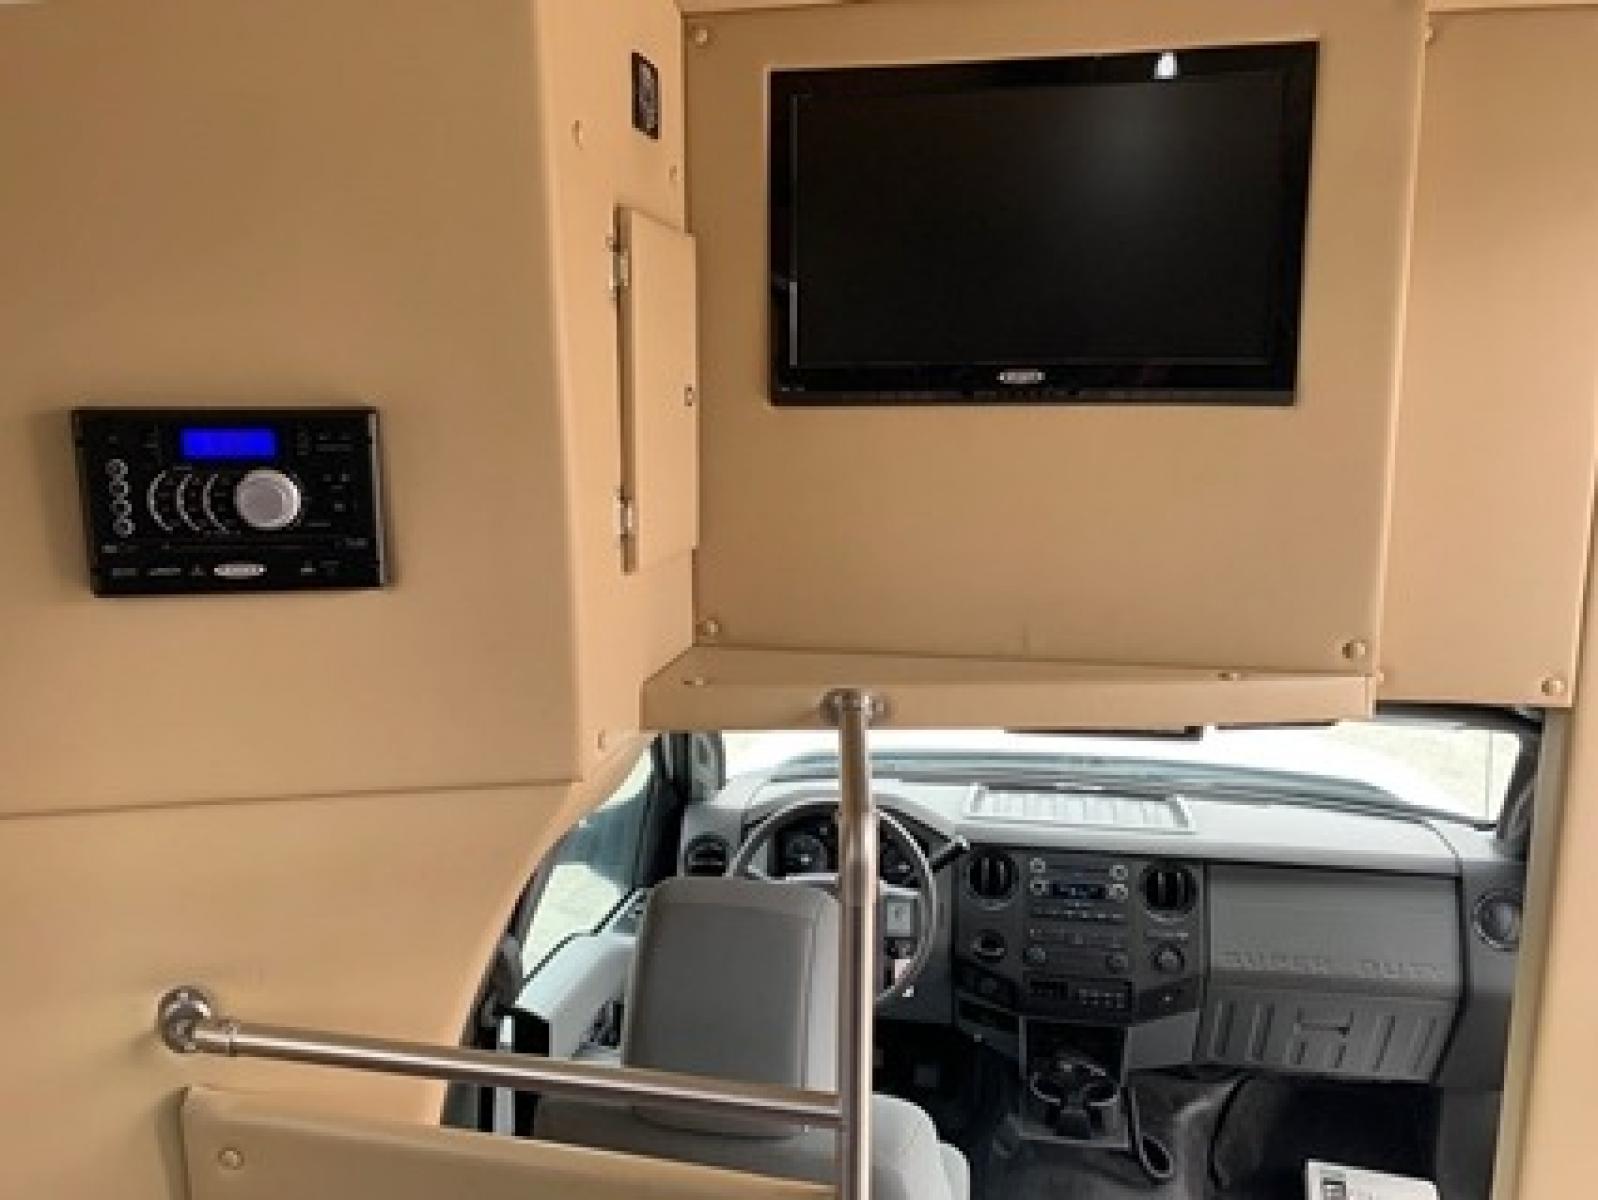 2014 White Ford F550 with an 6.7L engine, Auto transmission, 0.000000, 0.000000 - 2014 Ford F-550, Turtle Top Odyssey XL,- 6.7L Diesel Engine,- Automatic Trans,- Electric Entrance,Door,- 25 Passengers & Driver,- Mid Back Reclining Seats,- Retractable Seat Belts, - 110V Outlets,- Rear Dedicated Luggage,- Stainless Wheel Simulators,- Front and Rear A/C. - Photo #5